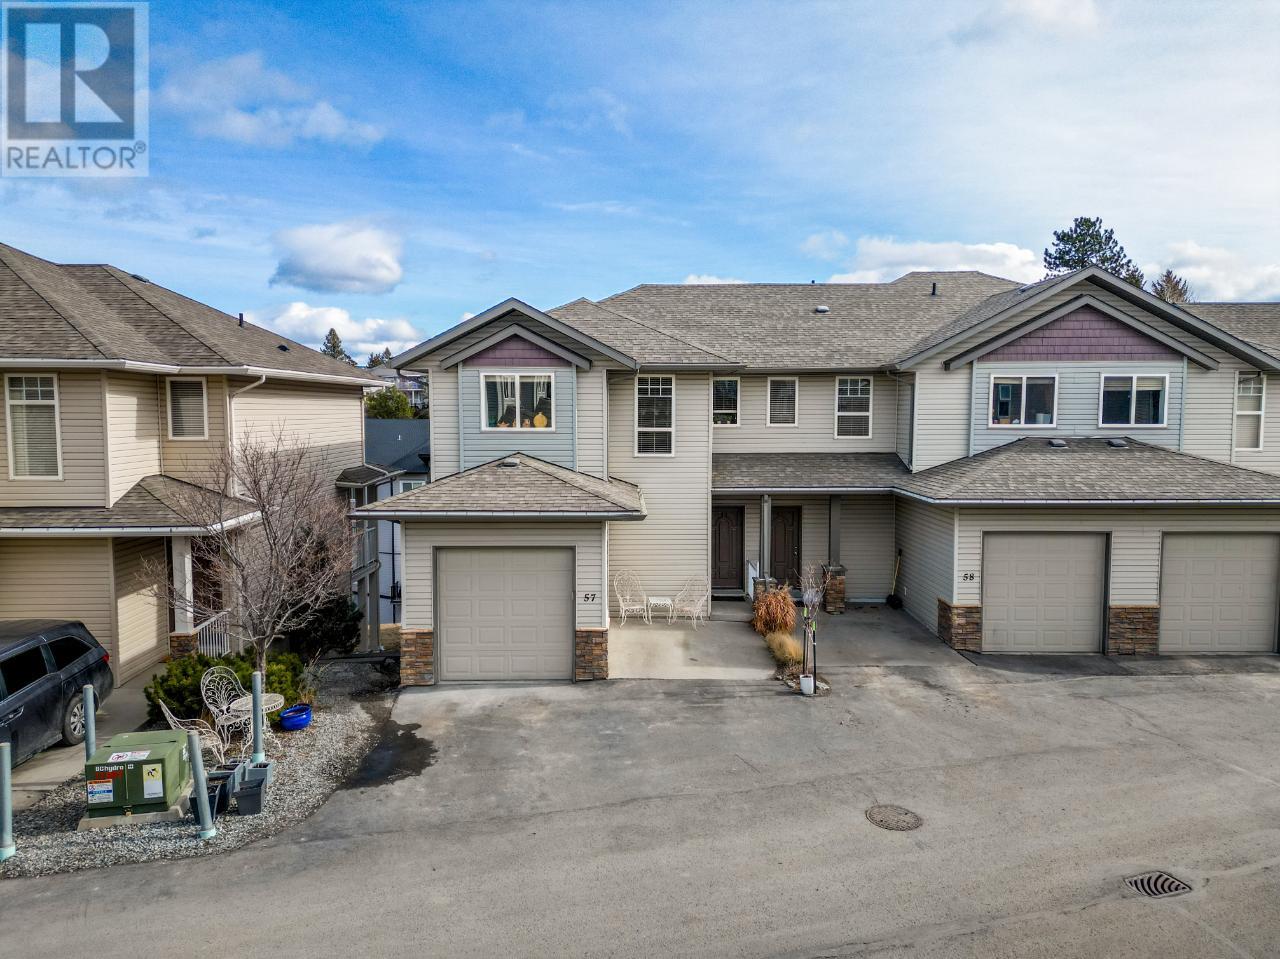 57-2046 ROBSON PLACE located in Kamloops, British Columbia